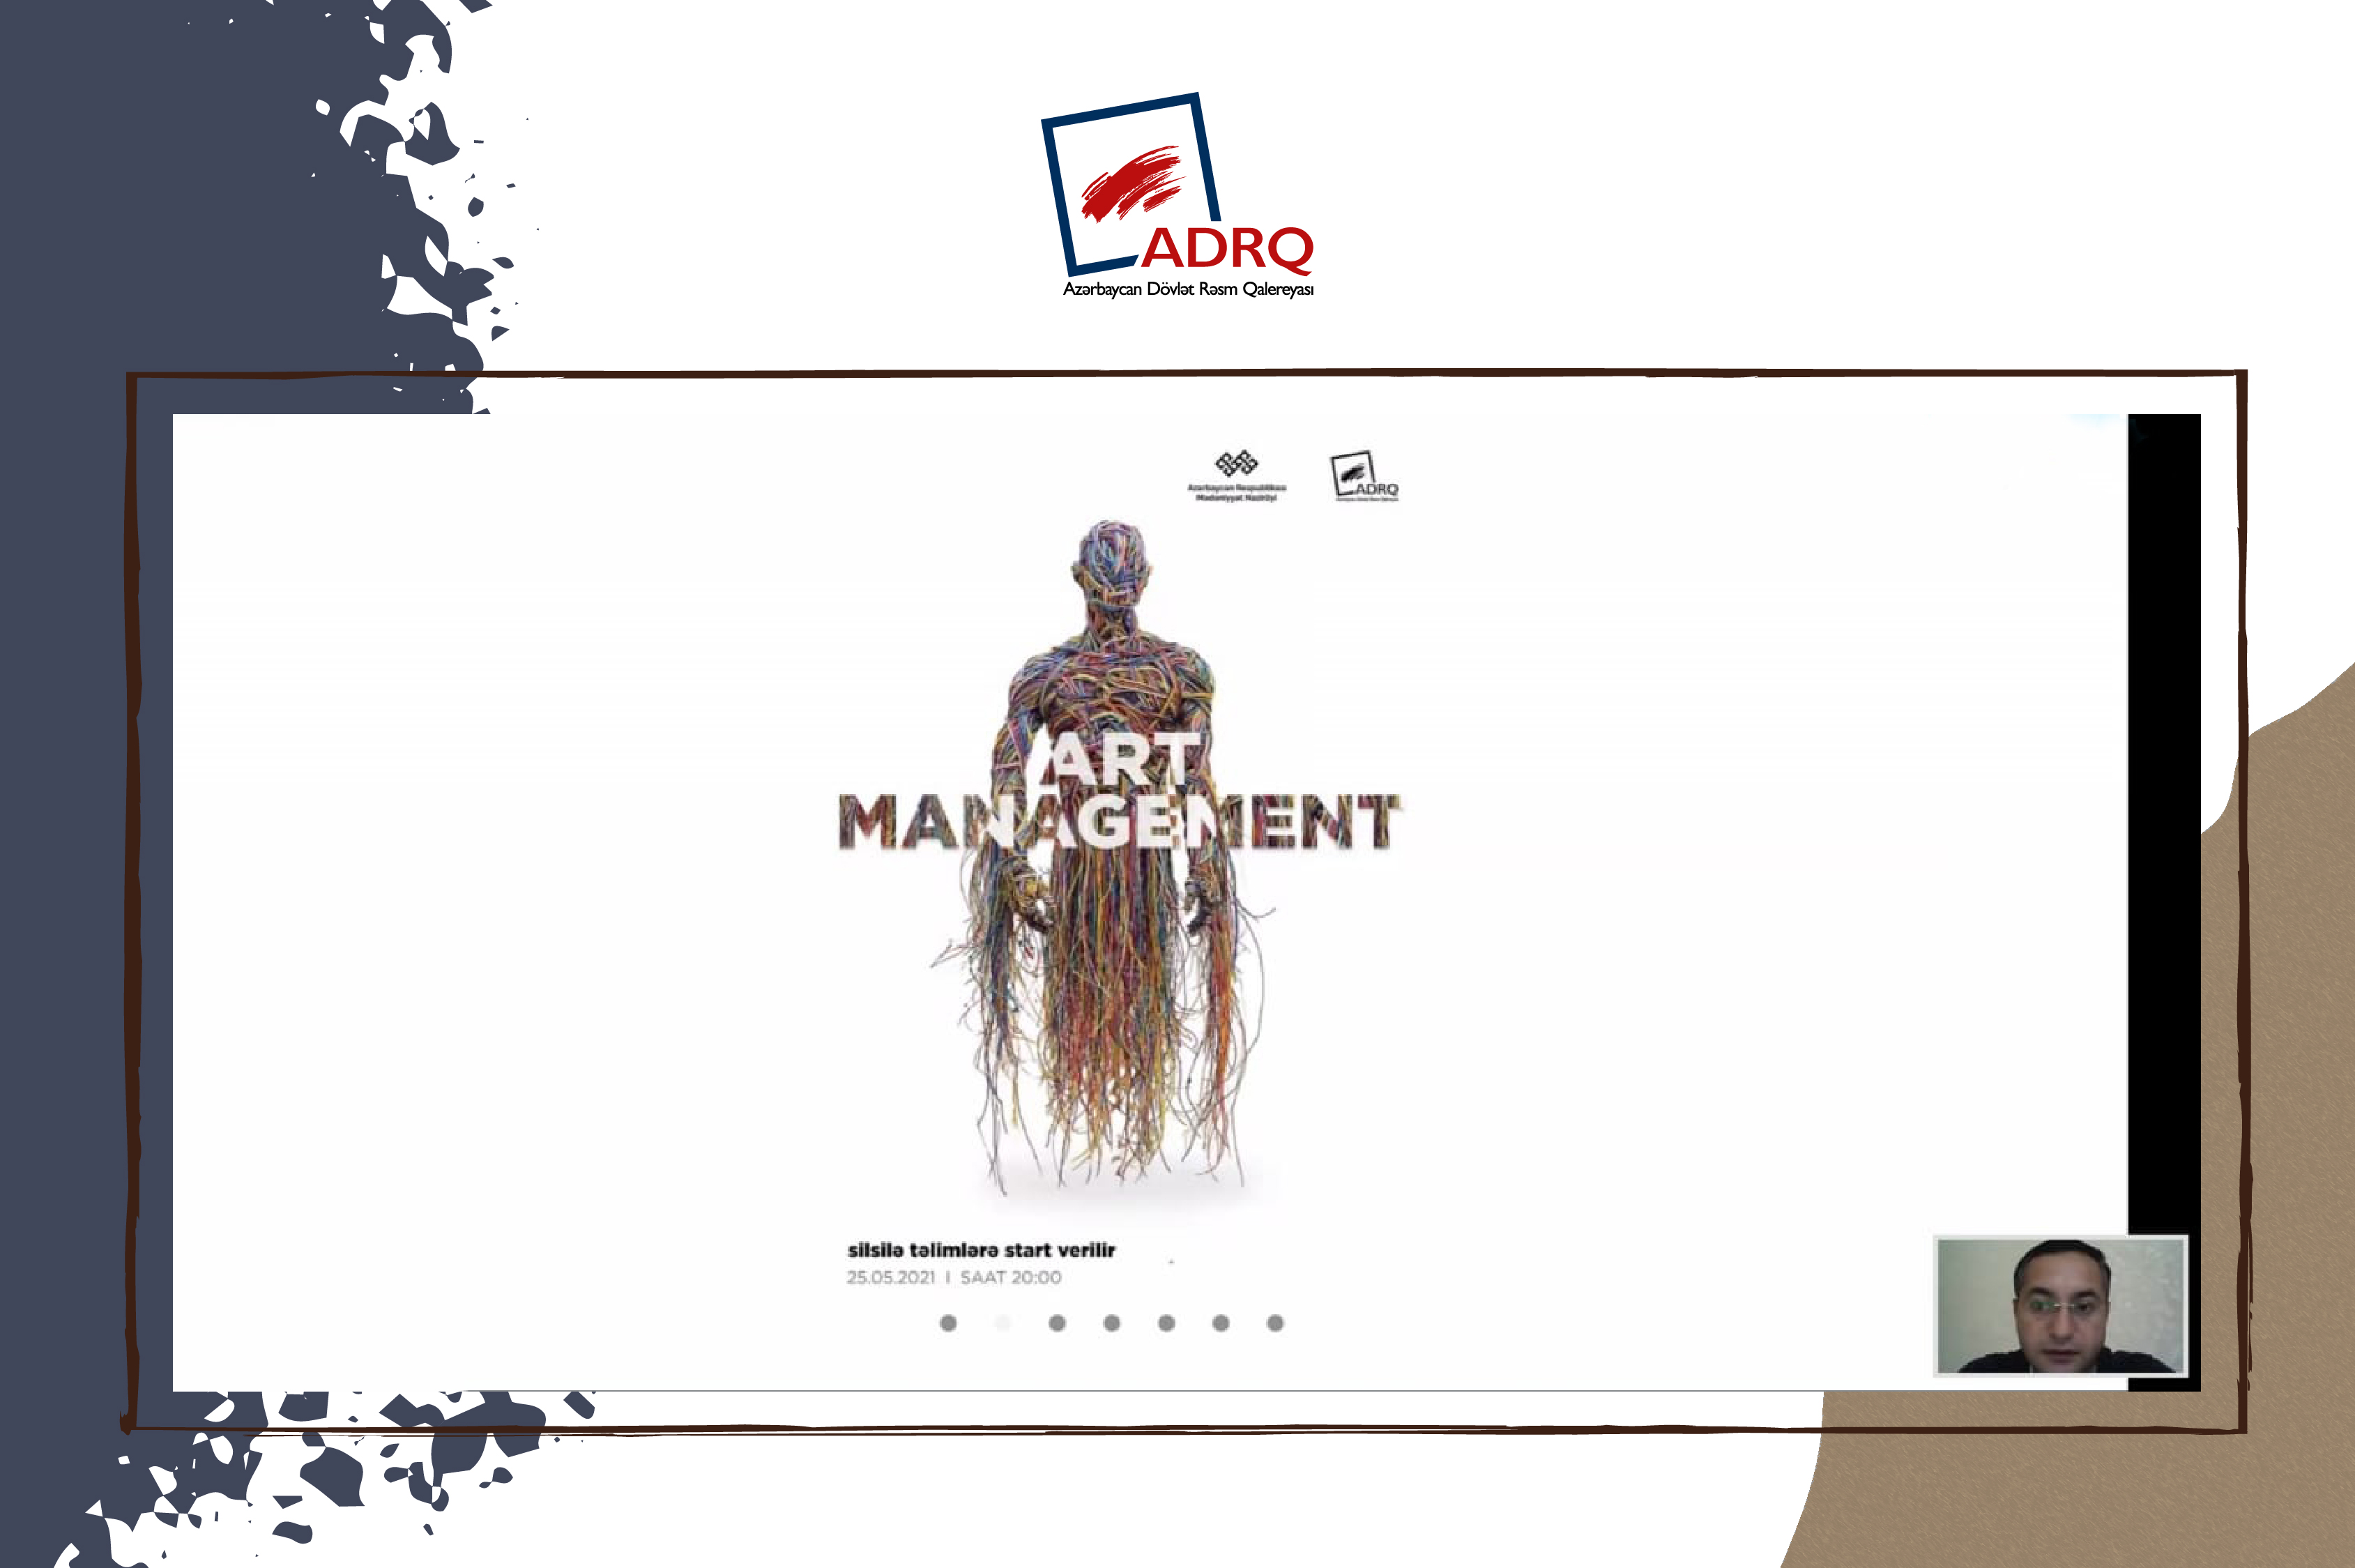 A series of “Art Management” trainings has started.